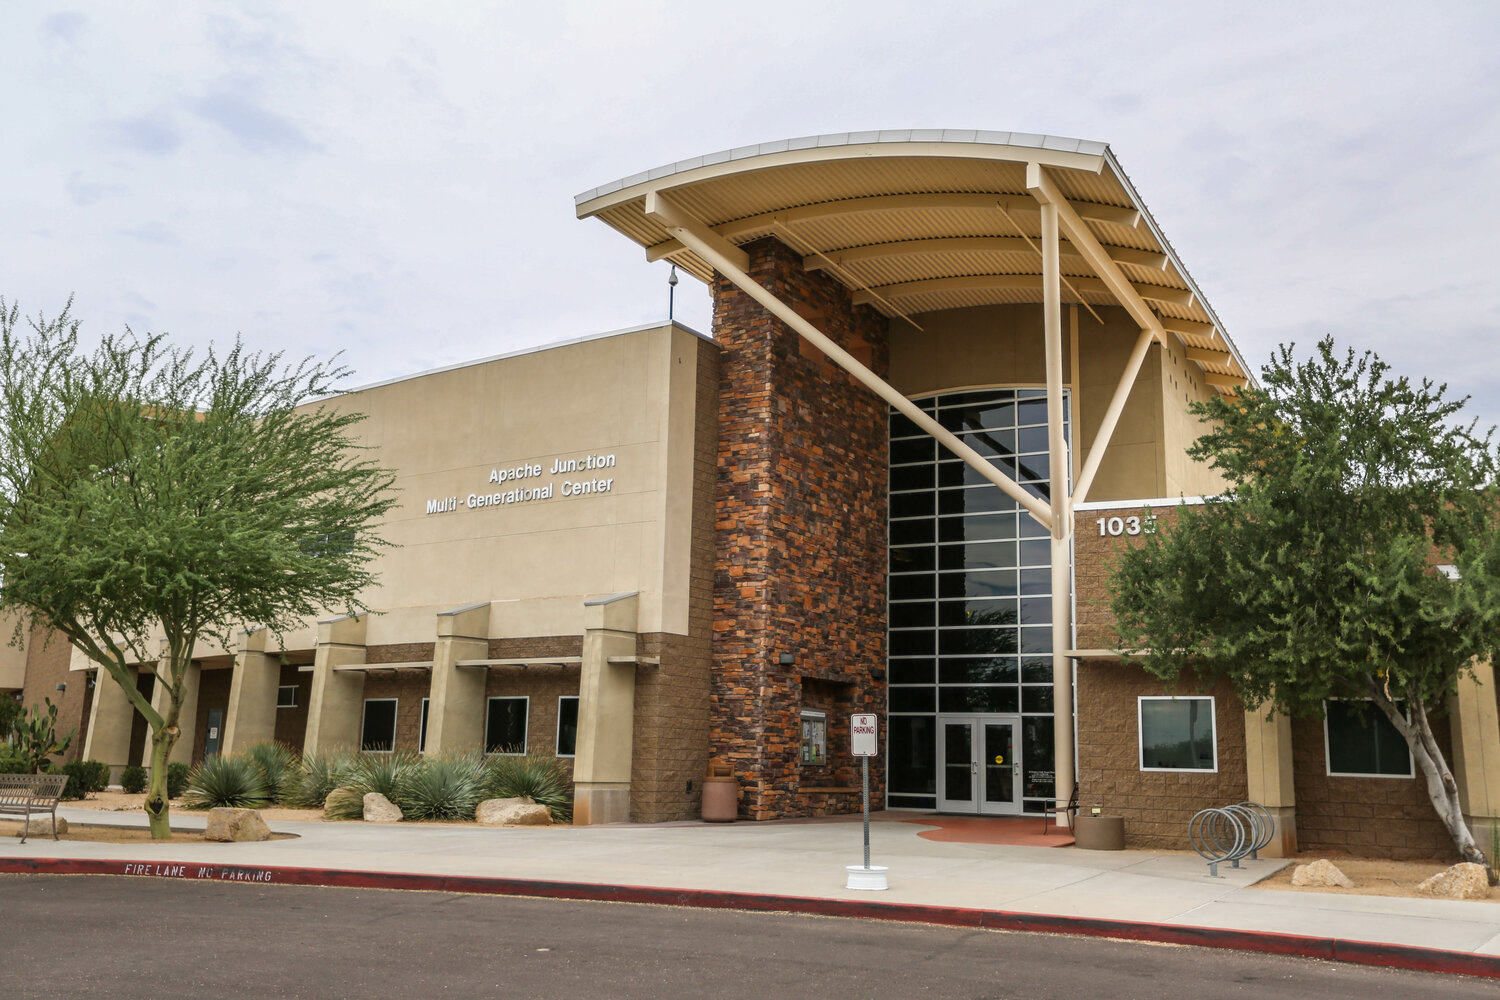 Apache Junction Multi-generational Center is at 1035 N. Idaho Road.